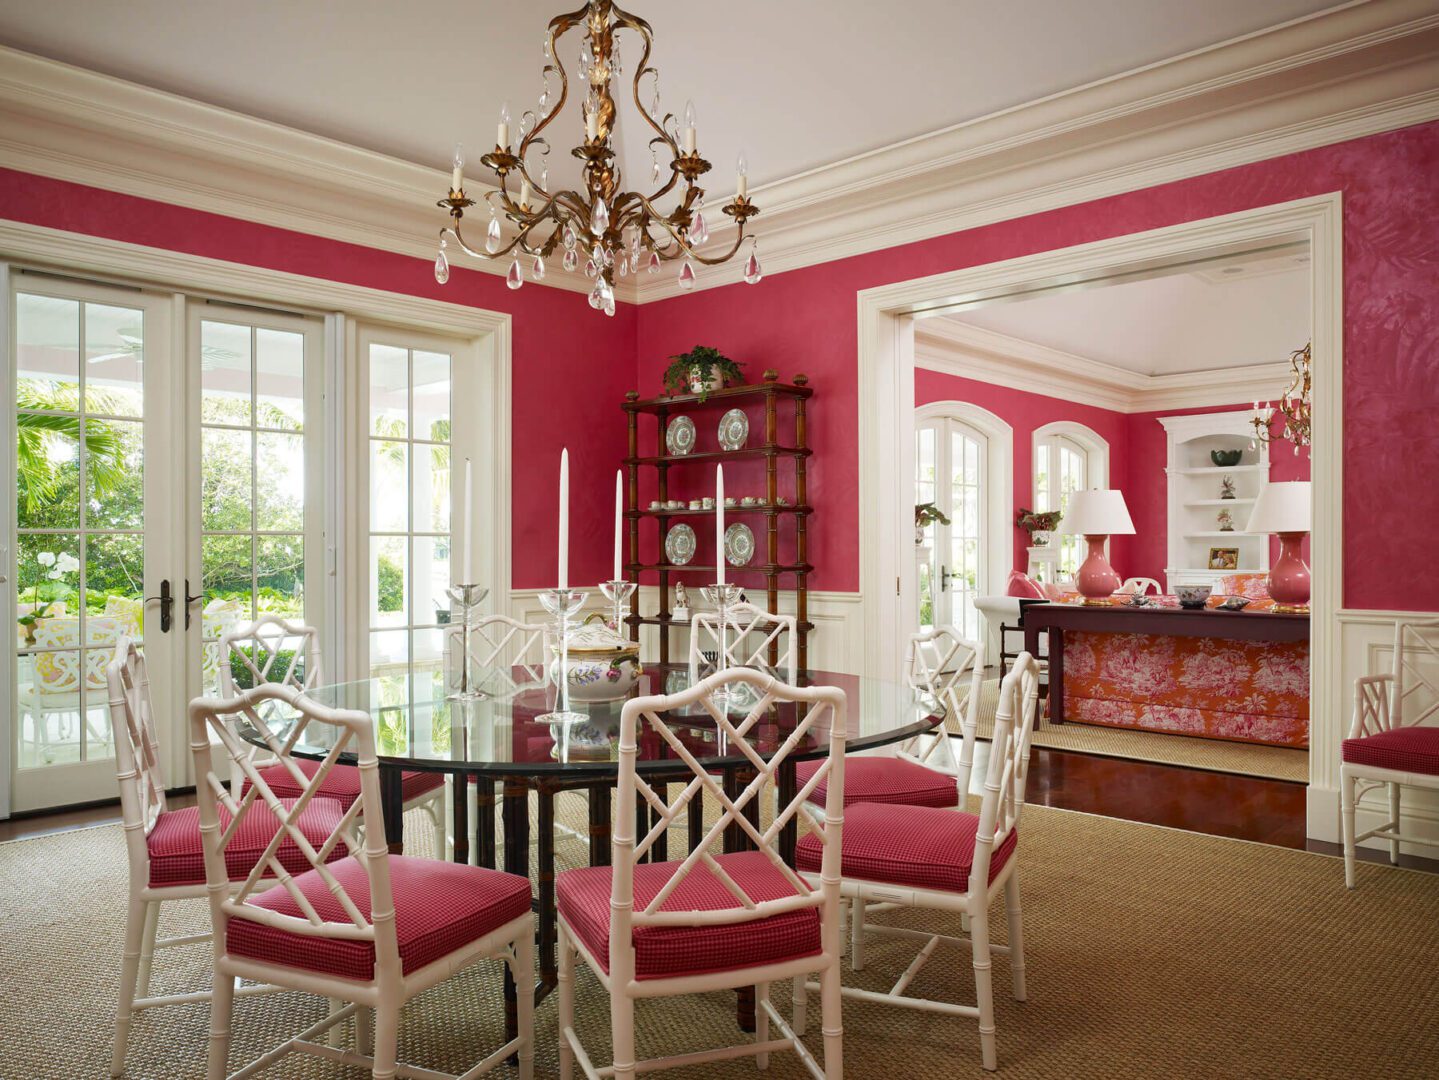 A dining room with pink walls and white furniture.